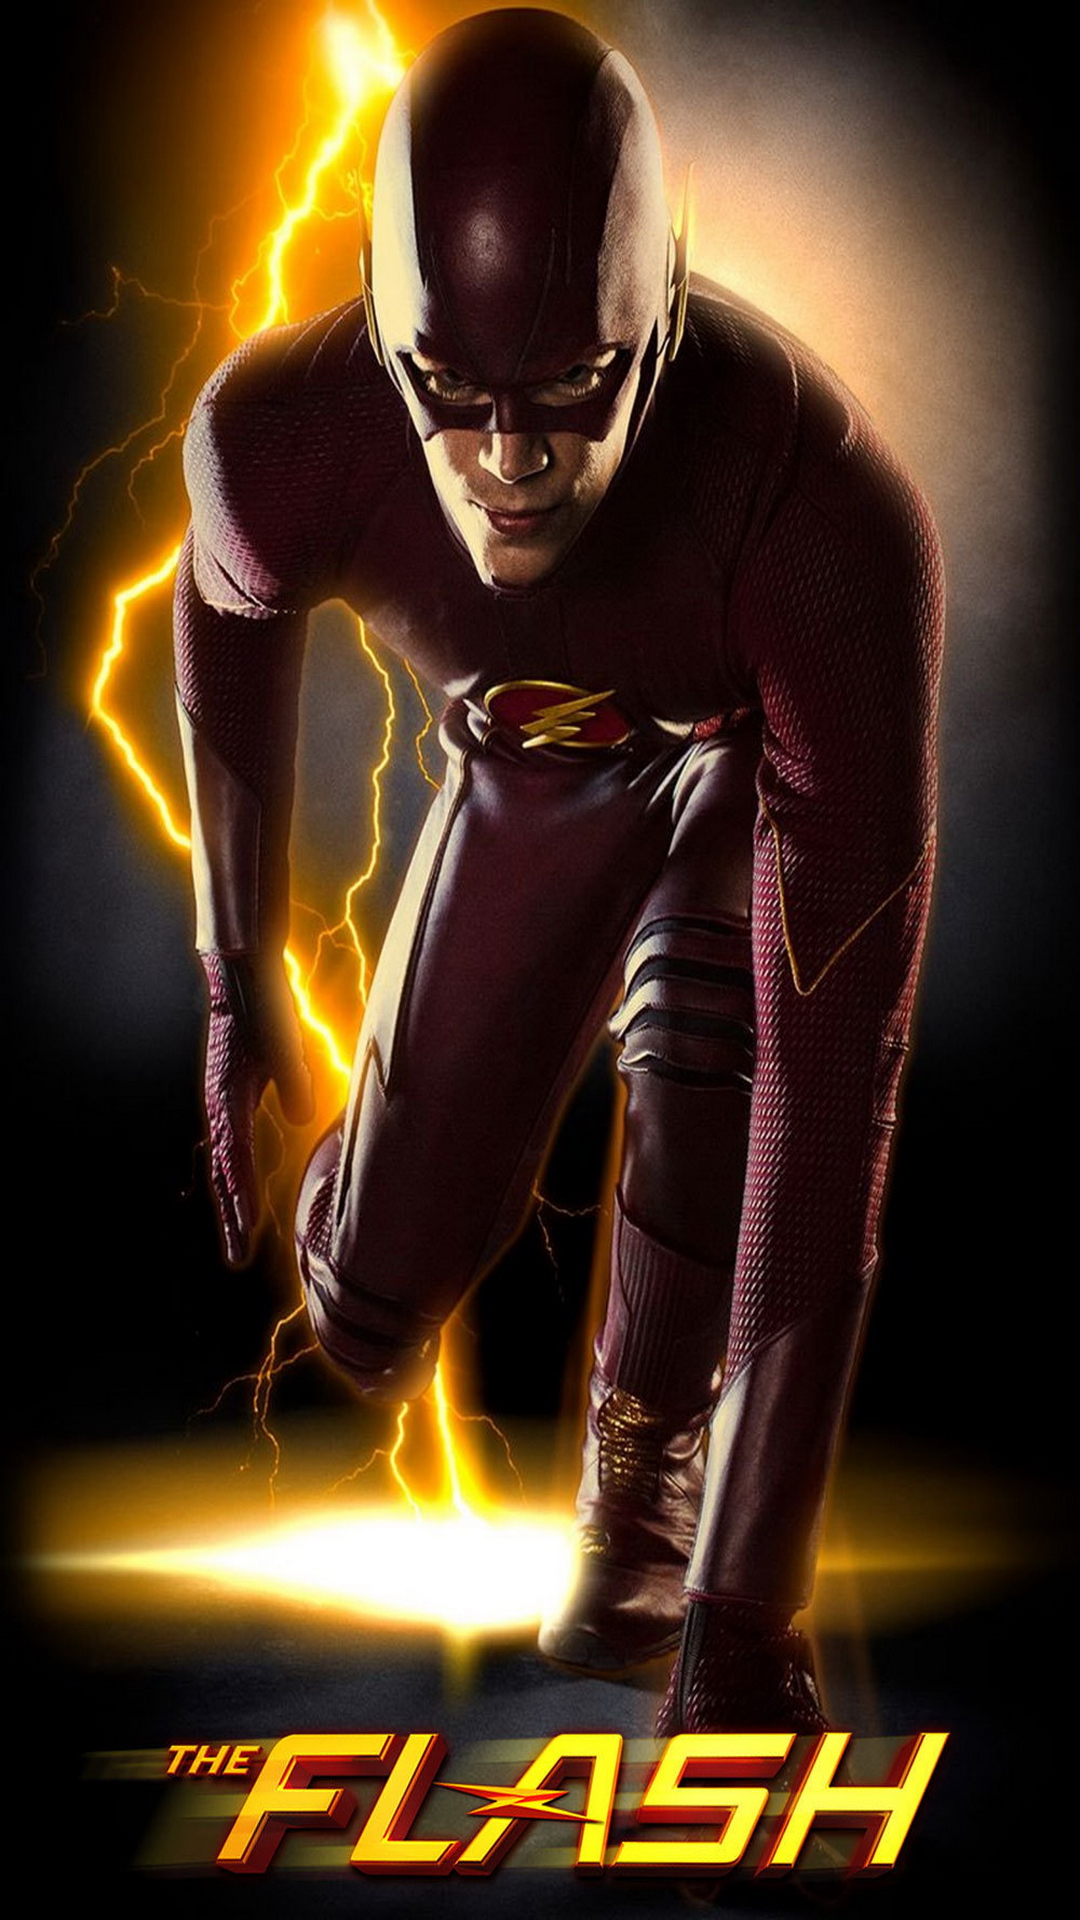 Wallpaper Weekends The Flash For Your Iphone 6 Plus Mactrast Iphone12 スマホ壁紙 待受画像ギャラリー